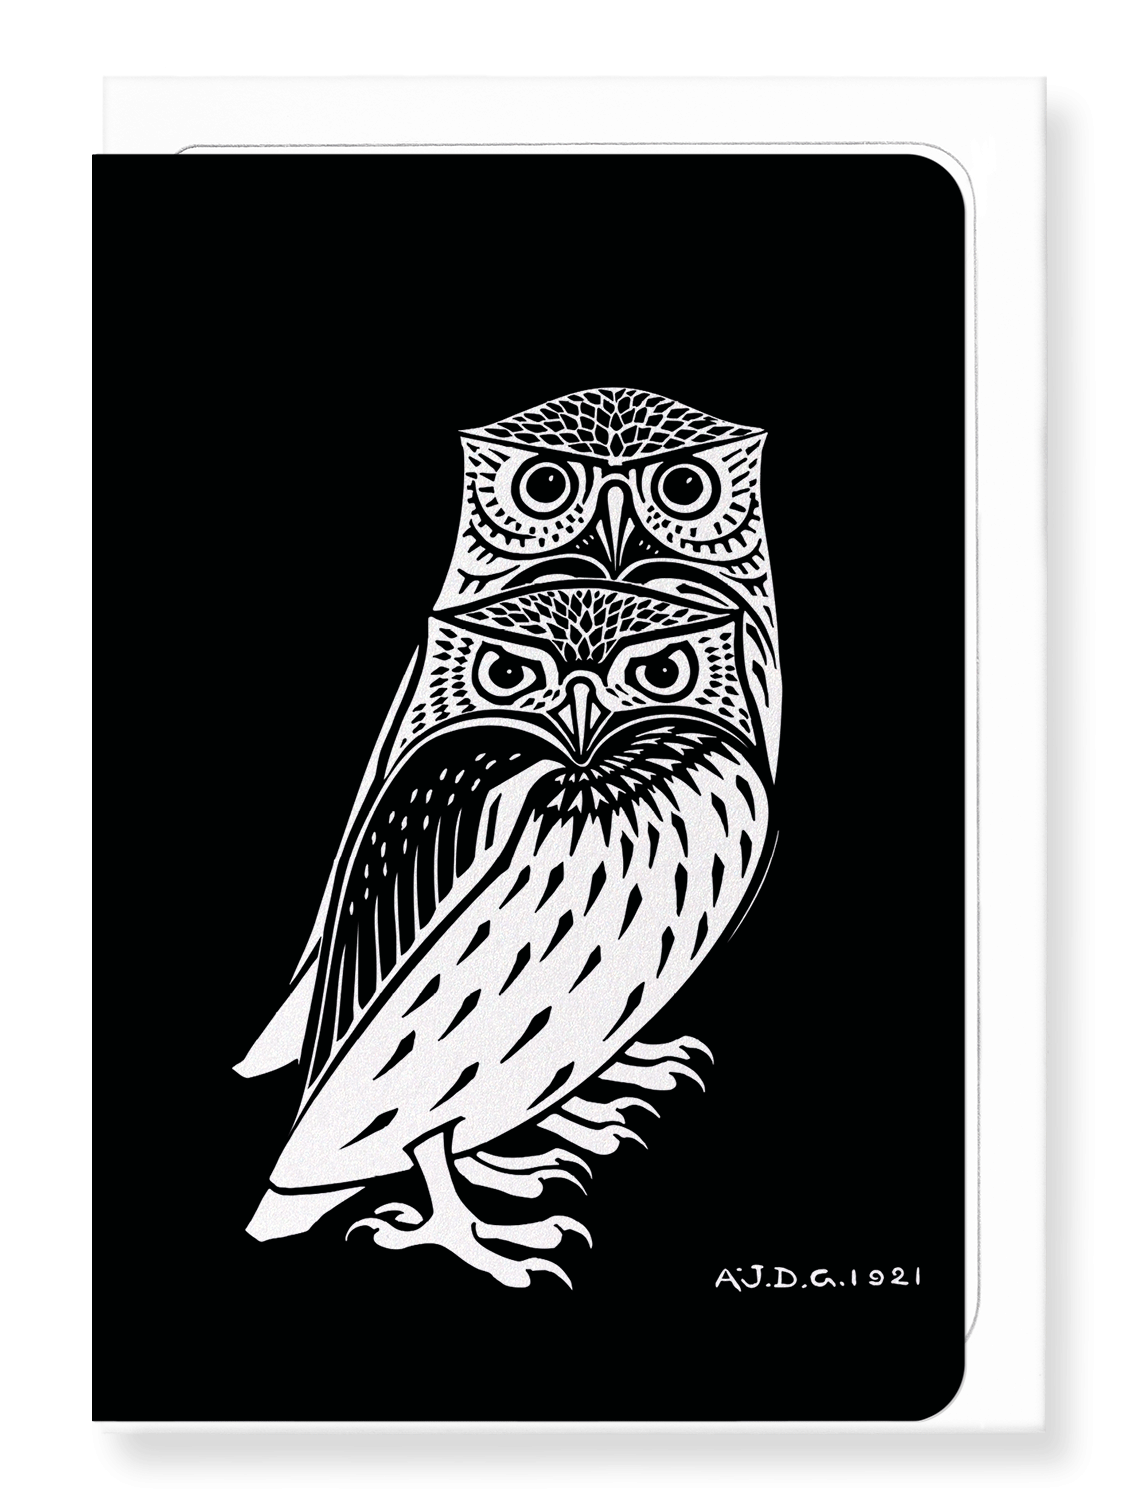 Ezen Designs - Two owls (1921) - Greeting Card - Front